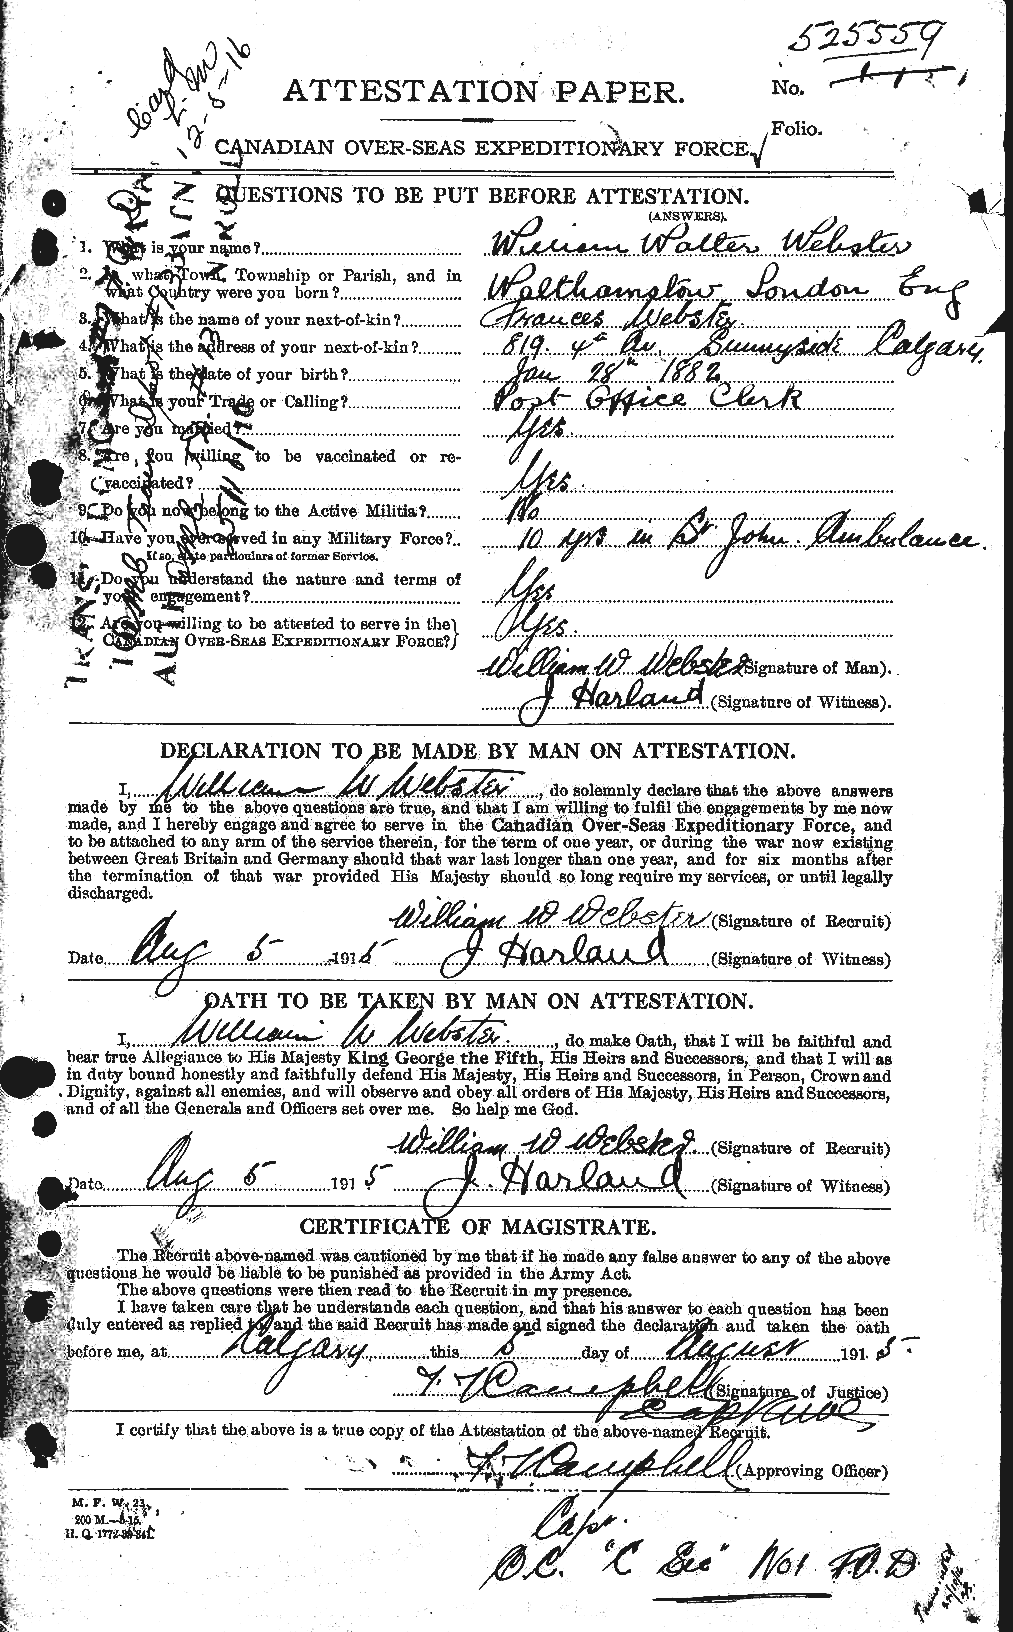 Personnel Records of the First World War - CEF 662039a